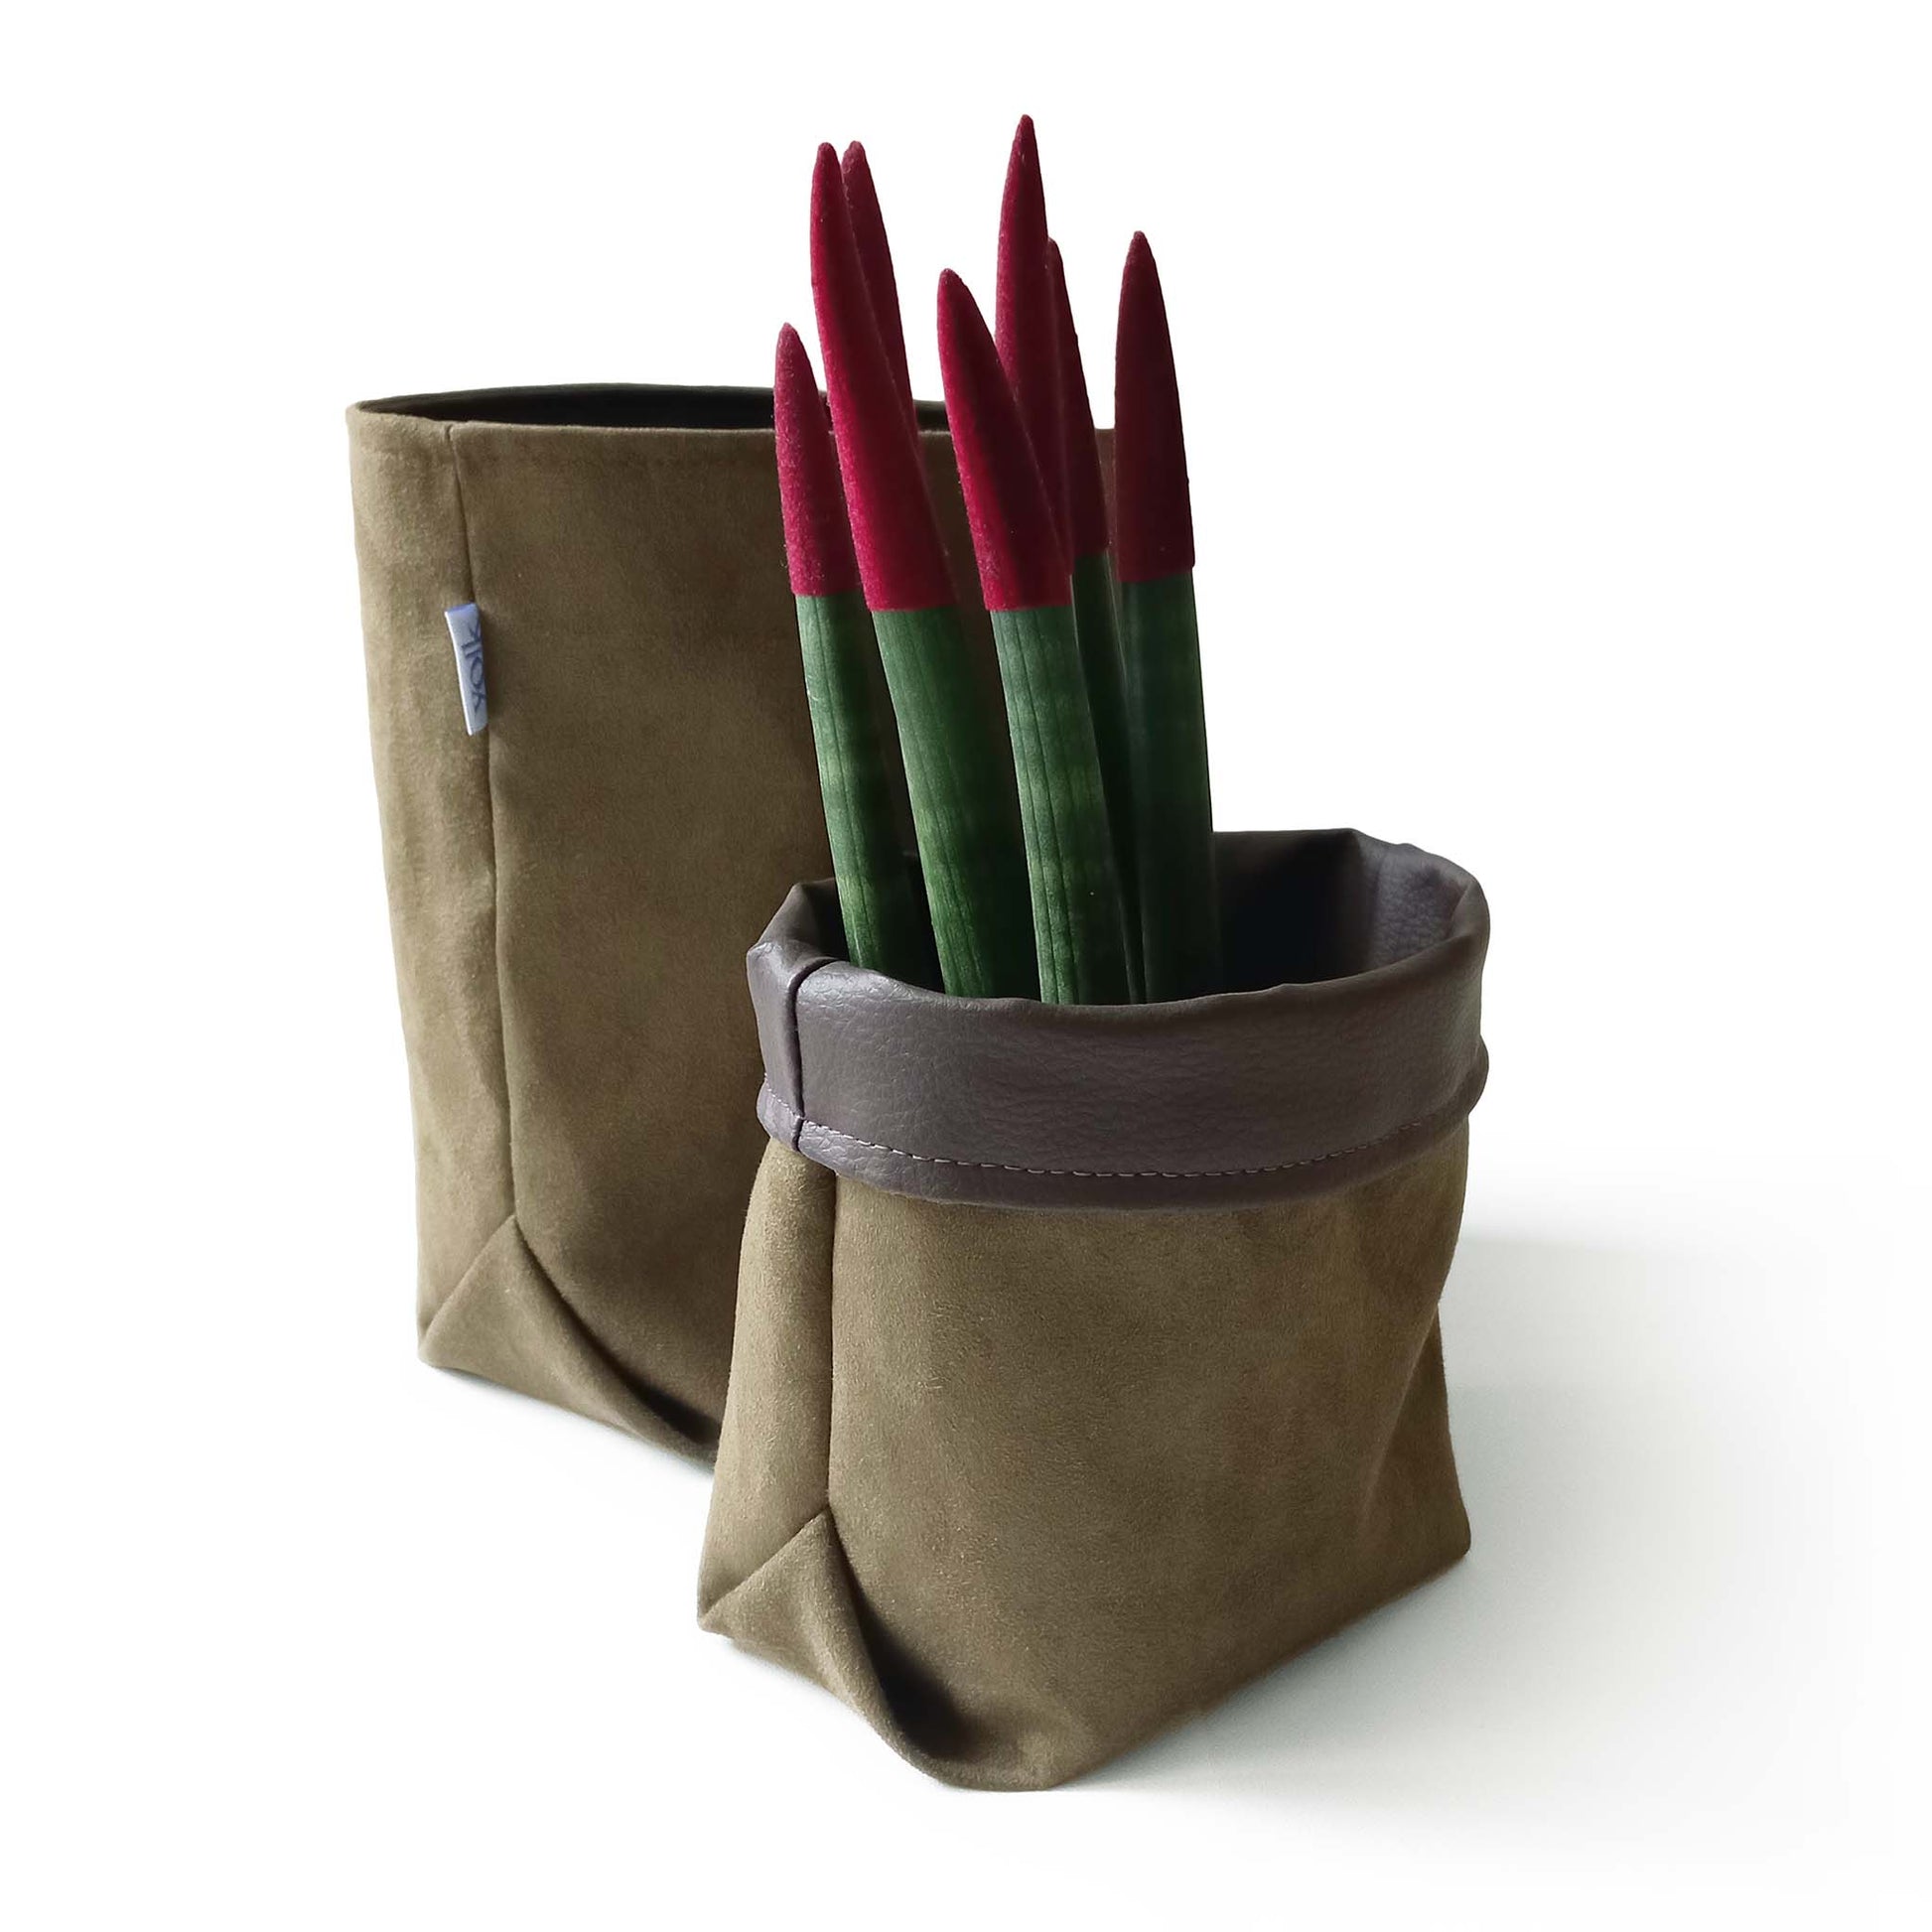 Suede fabric baskets, one used as a plant pot